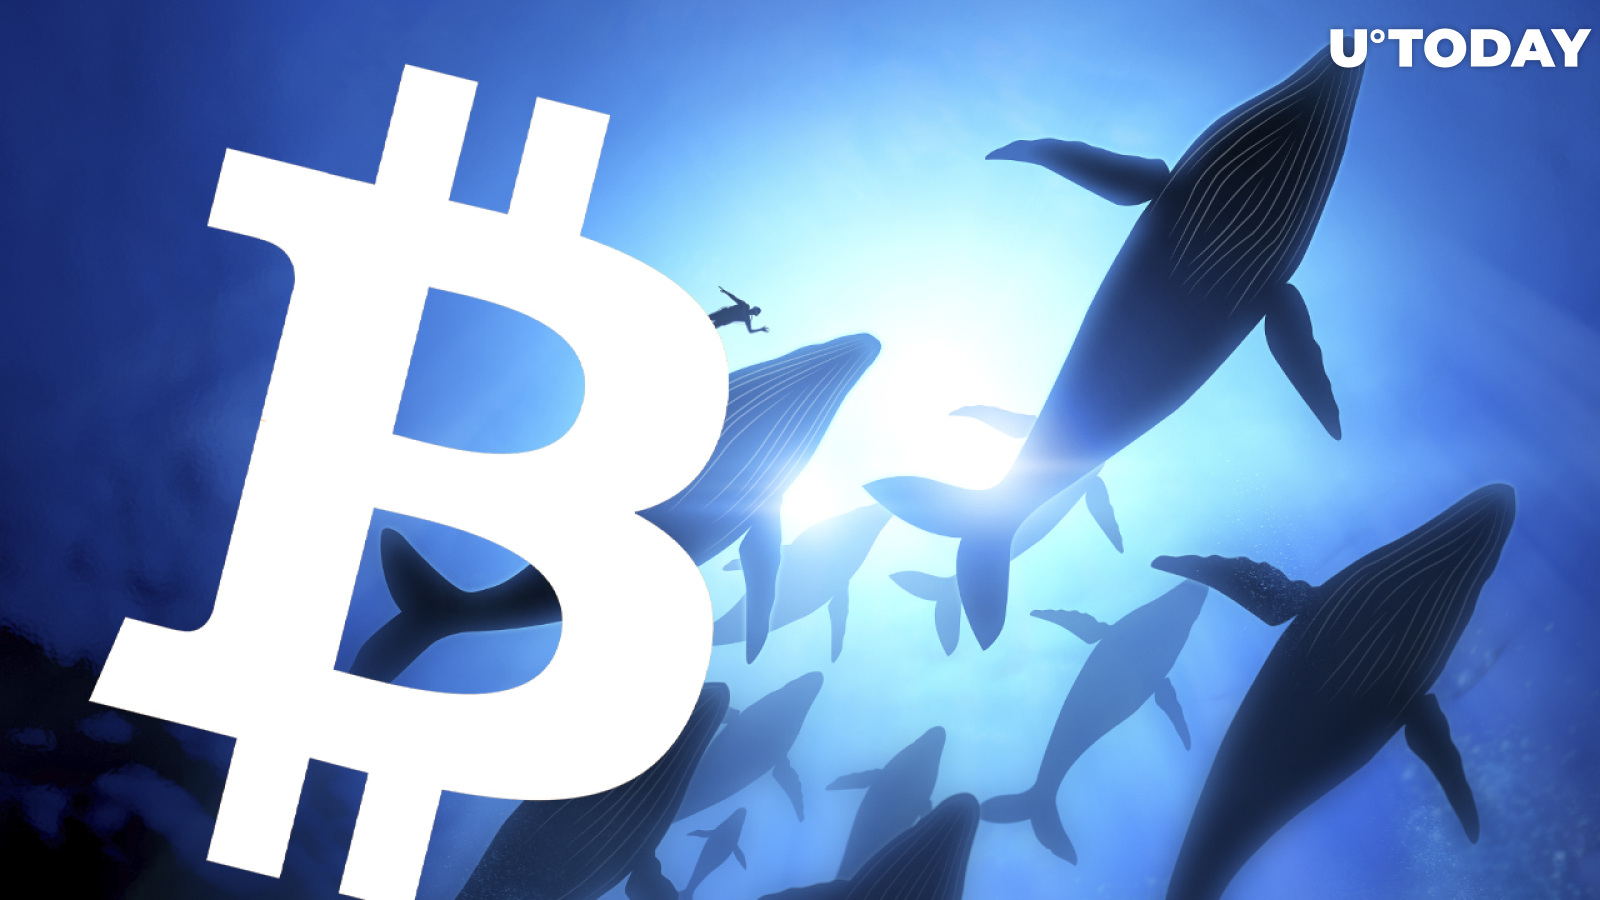 This Bitcoin (BTC) Whale Allocates $1 Million Every Day Regardless of Price. How Much Does He Hold?